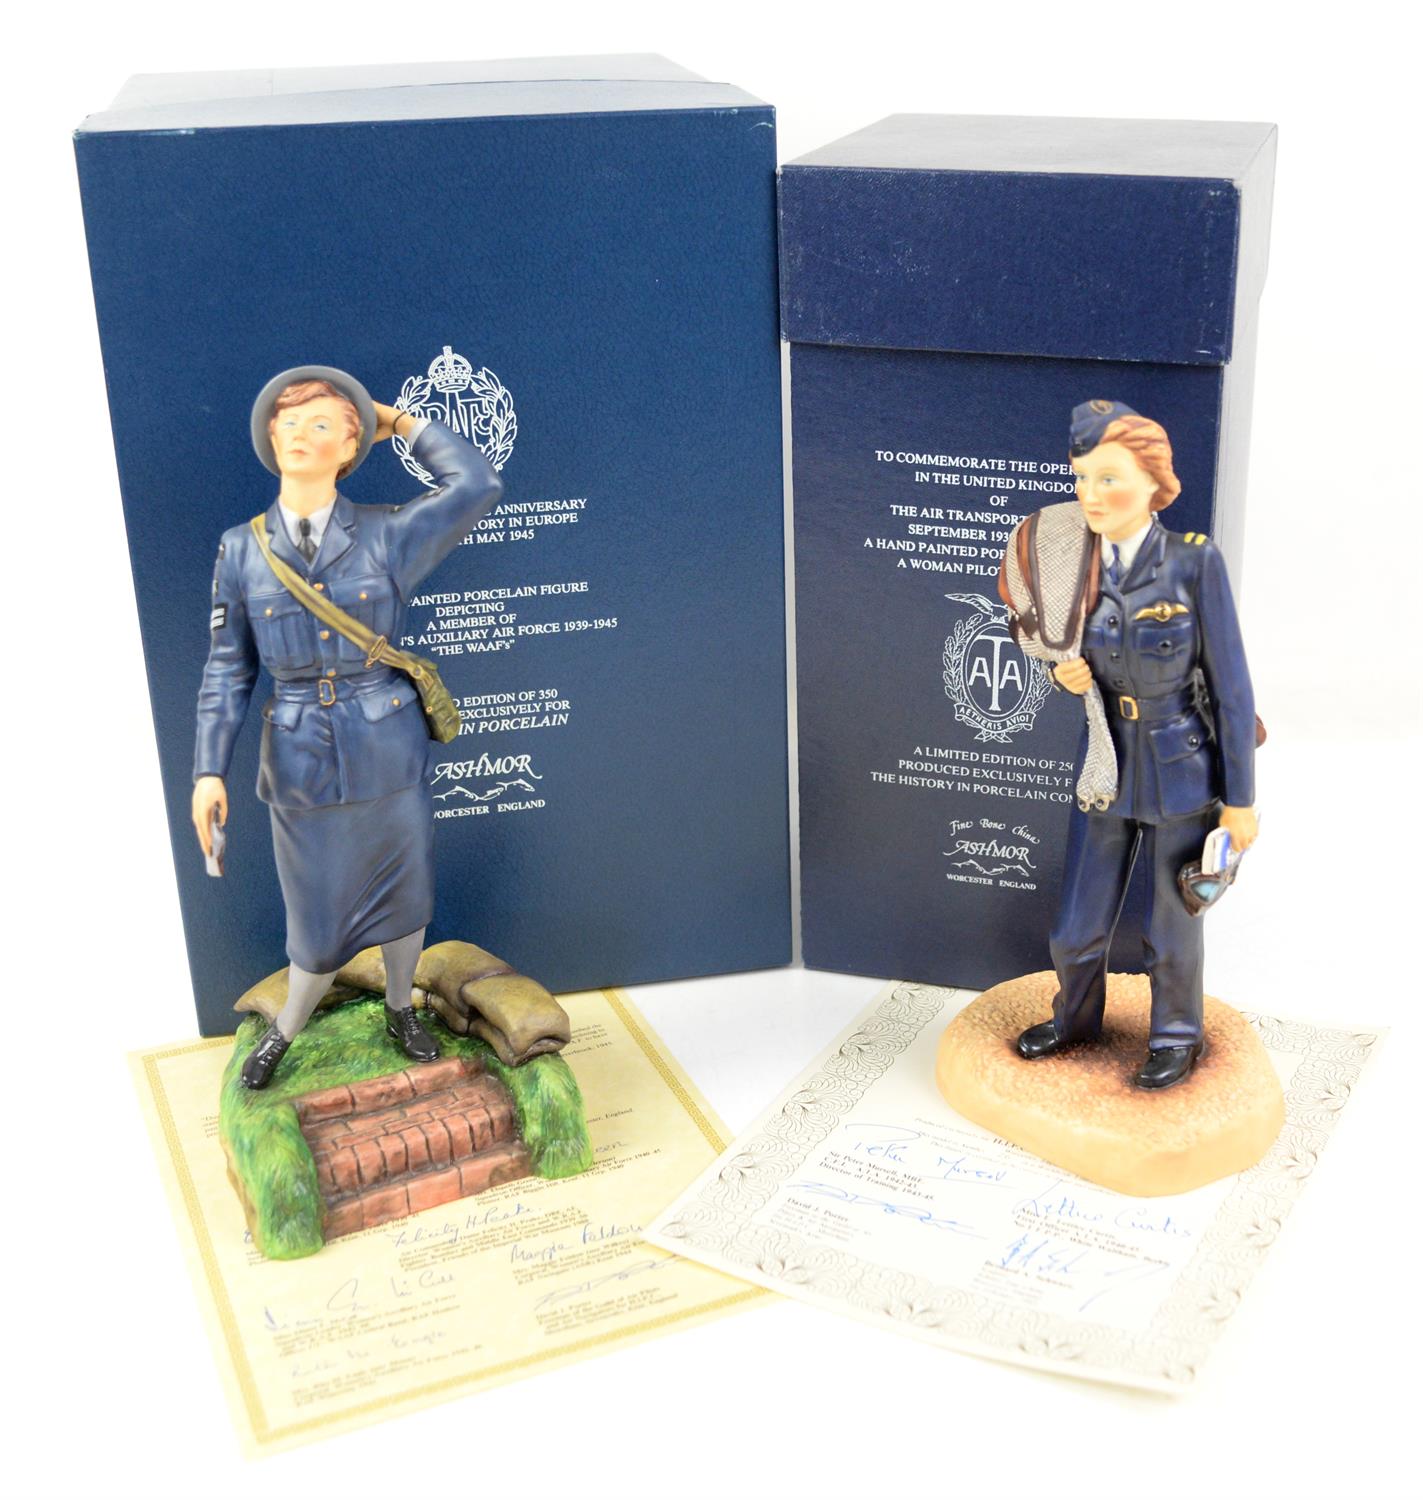 Ashmor Fine China for 'History in Porcelain' limited edition figure representing The Women's